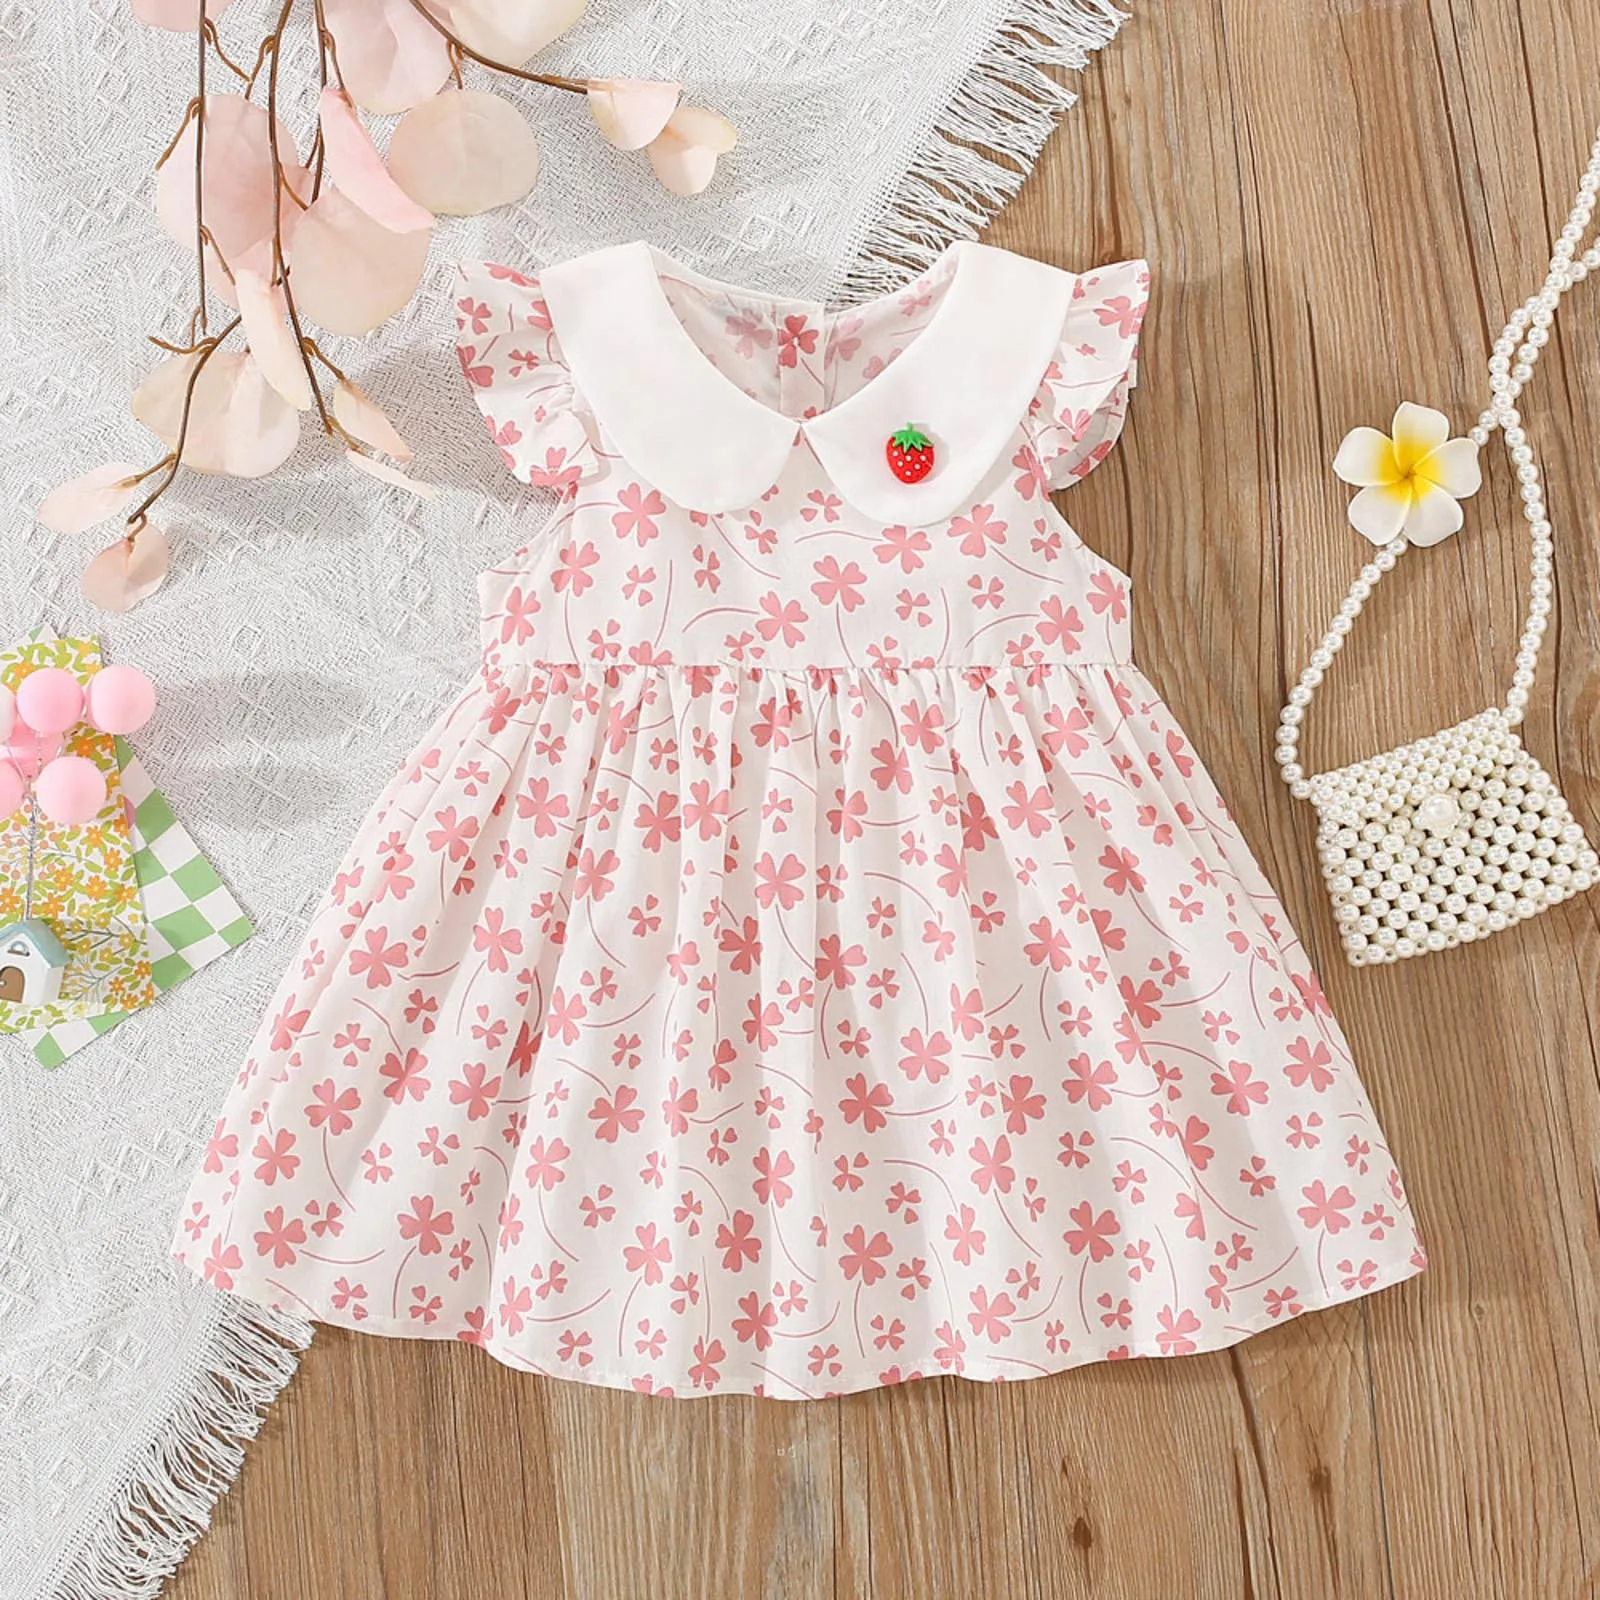 

Baby Clothes Cute Girls Dresses Fly Sleeve Floral Prints Ruffles Princess Dress 0-3Y Bithday Party Dress Toddler Summer Clothes